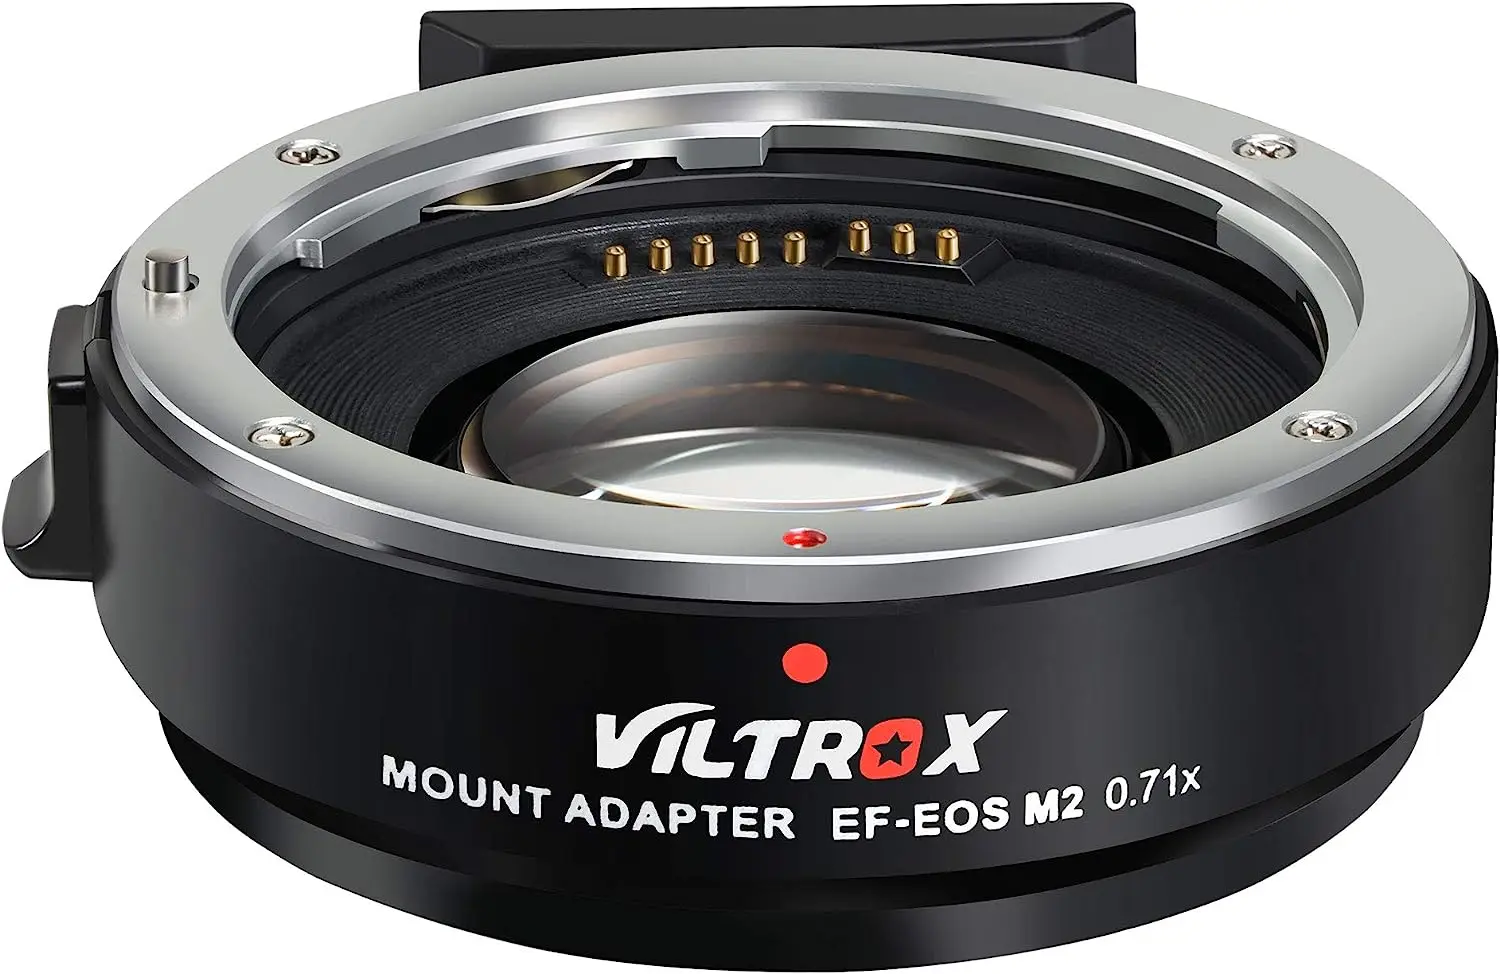 

VILTROX EF-EOS M2 Speed Booster 0.71x Canon EF Lens to EF-M Mount Speedbooster for Canon m50 ii m6 ii m200 m50 m6 m5